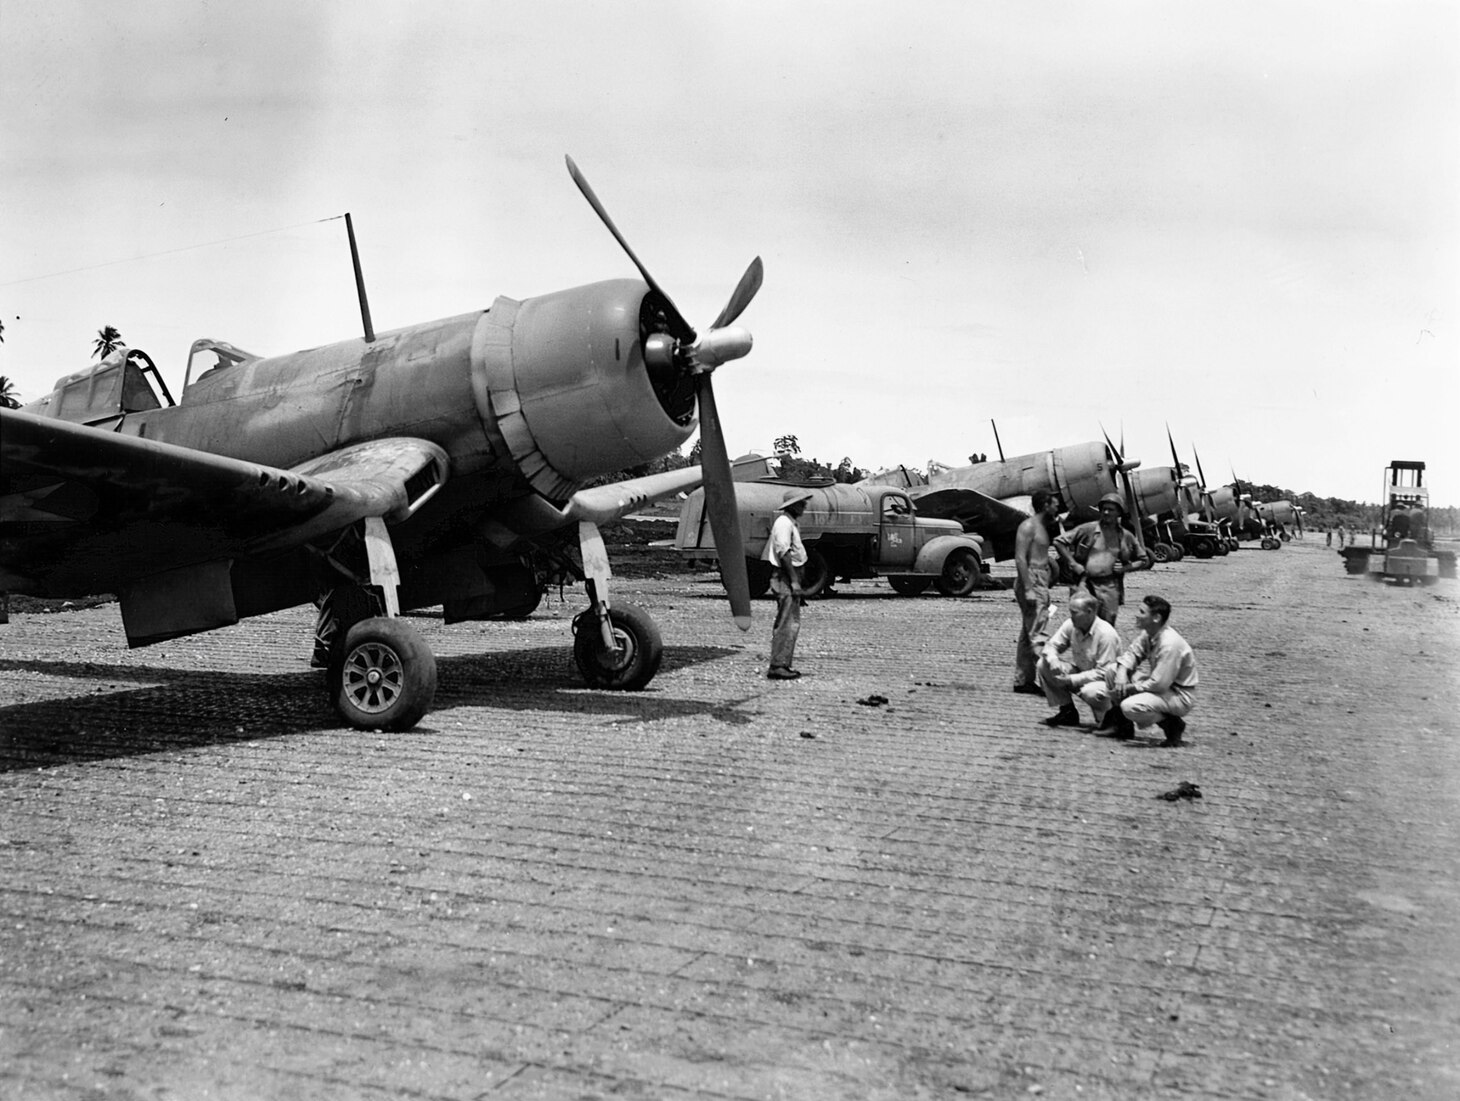 These Marine Fighter Squadron (VMF) 124 F4U-1s were the first Corsairs to arrive at Guadalcanal in February 1943. Note their hallmark “bird cage” canopies.